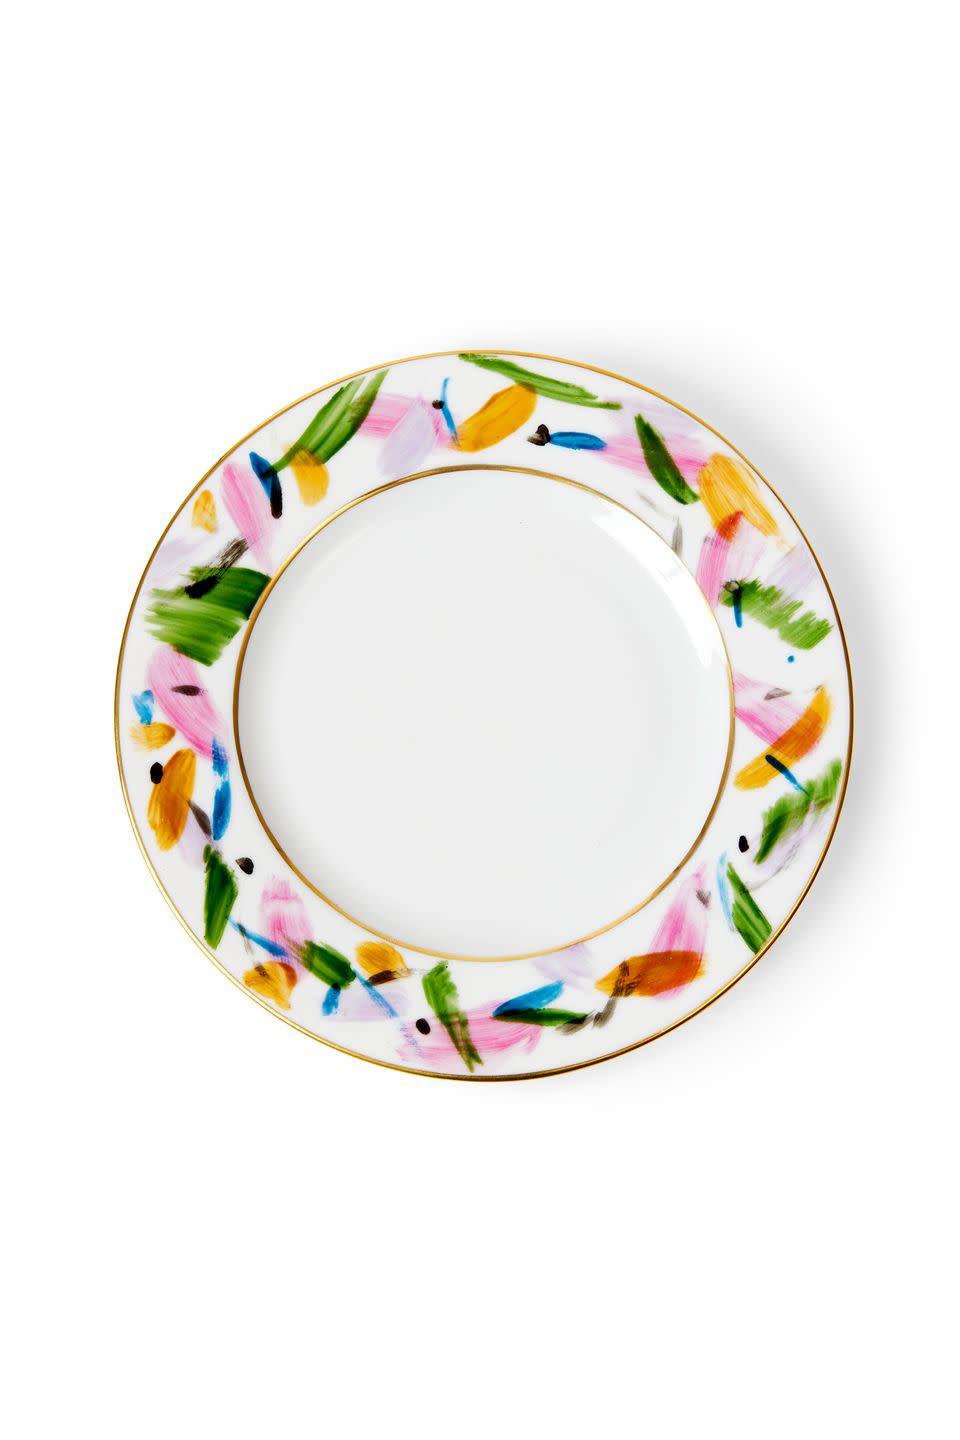 desert plate with colorful abstract watercolor smudges along the outside rim